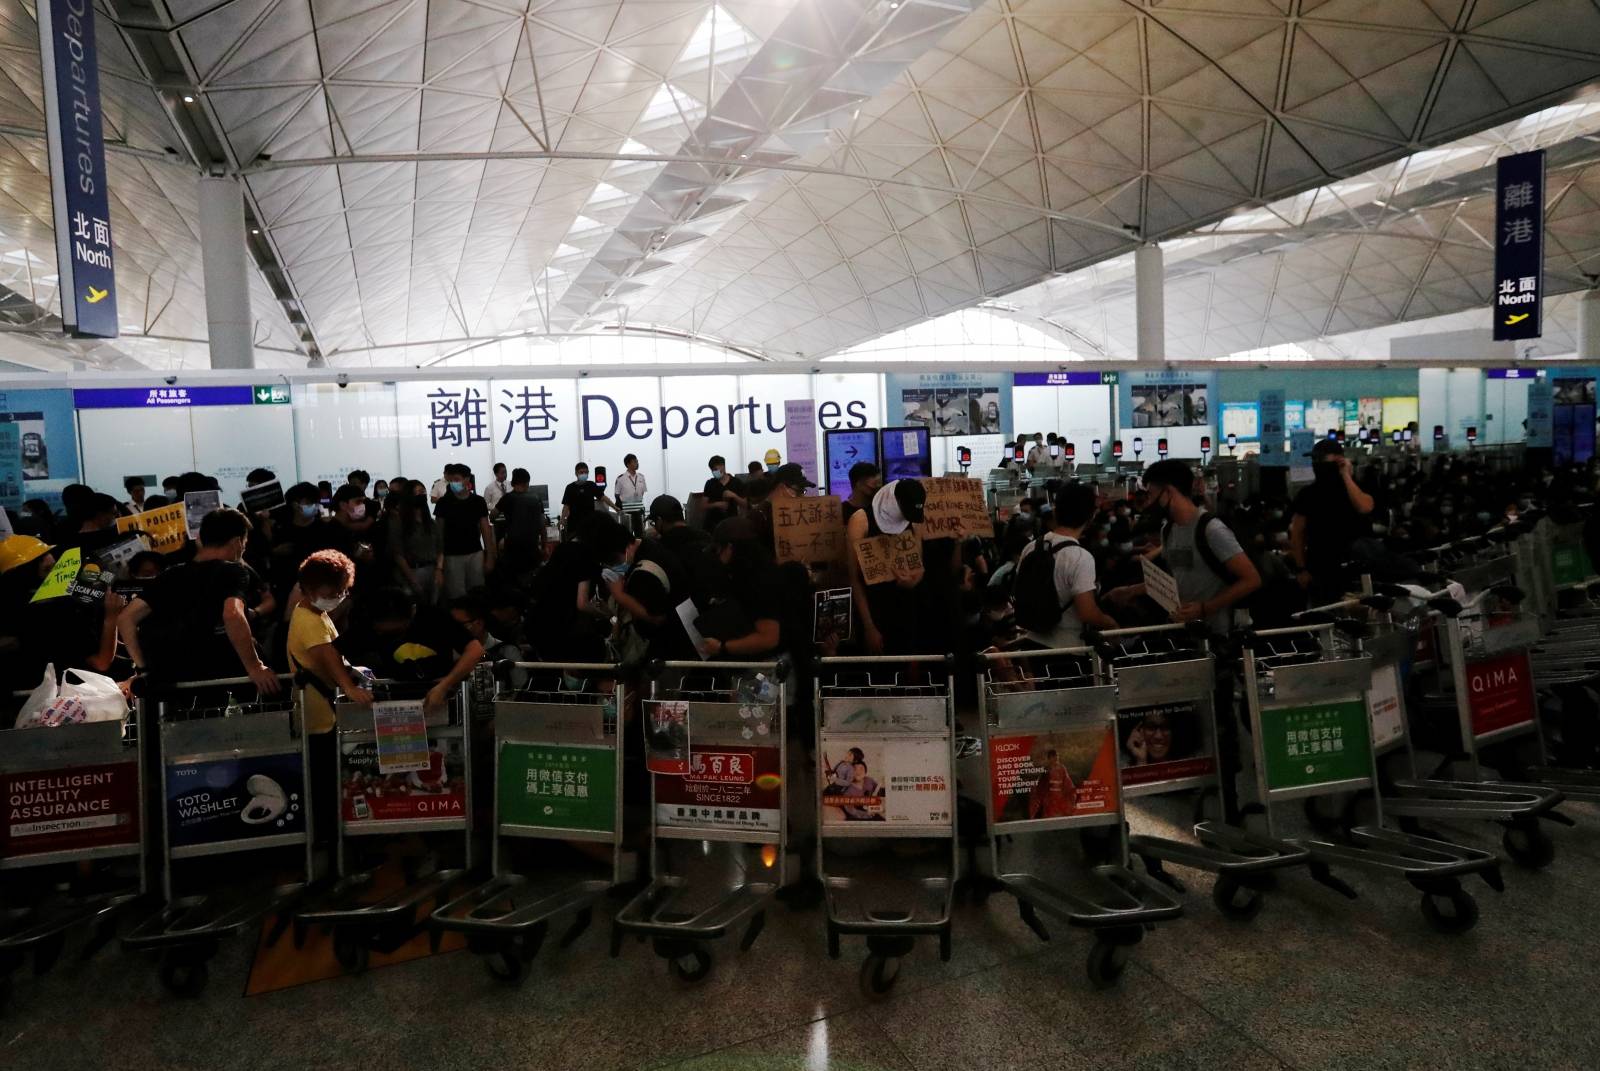 Anti-government protesters stand at a barricade made of trolleys during a demonstration at Hong Kong Airport